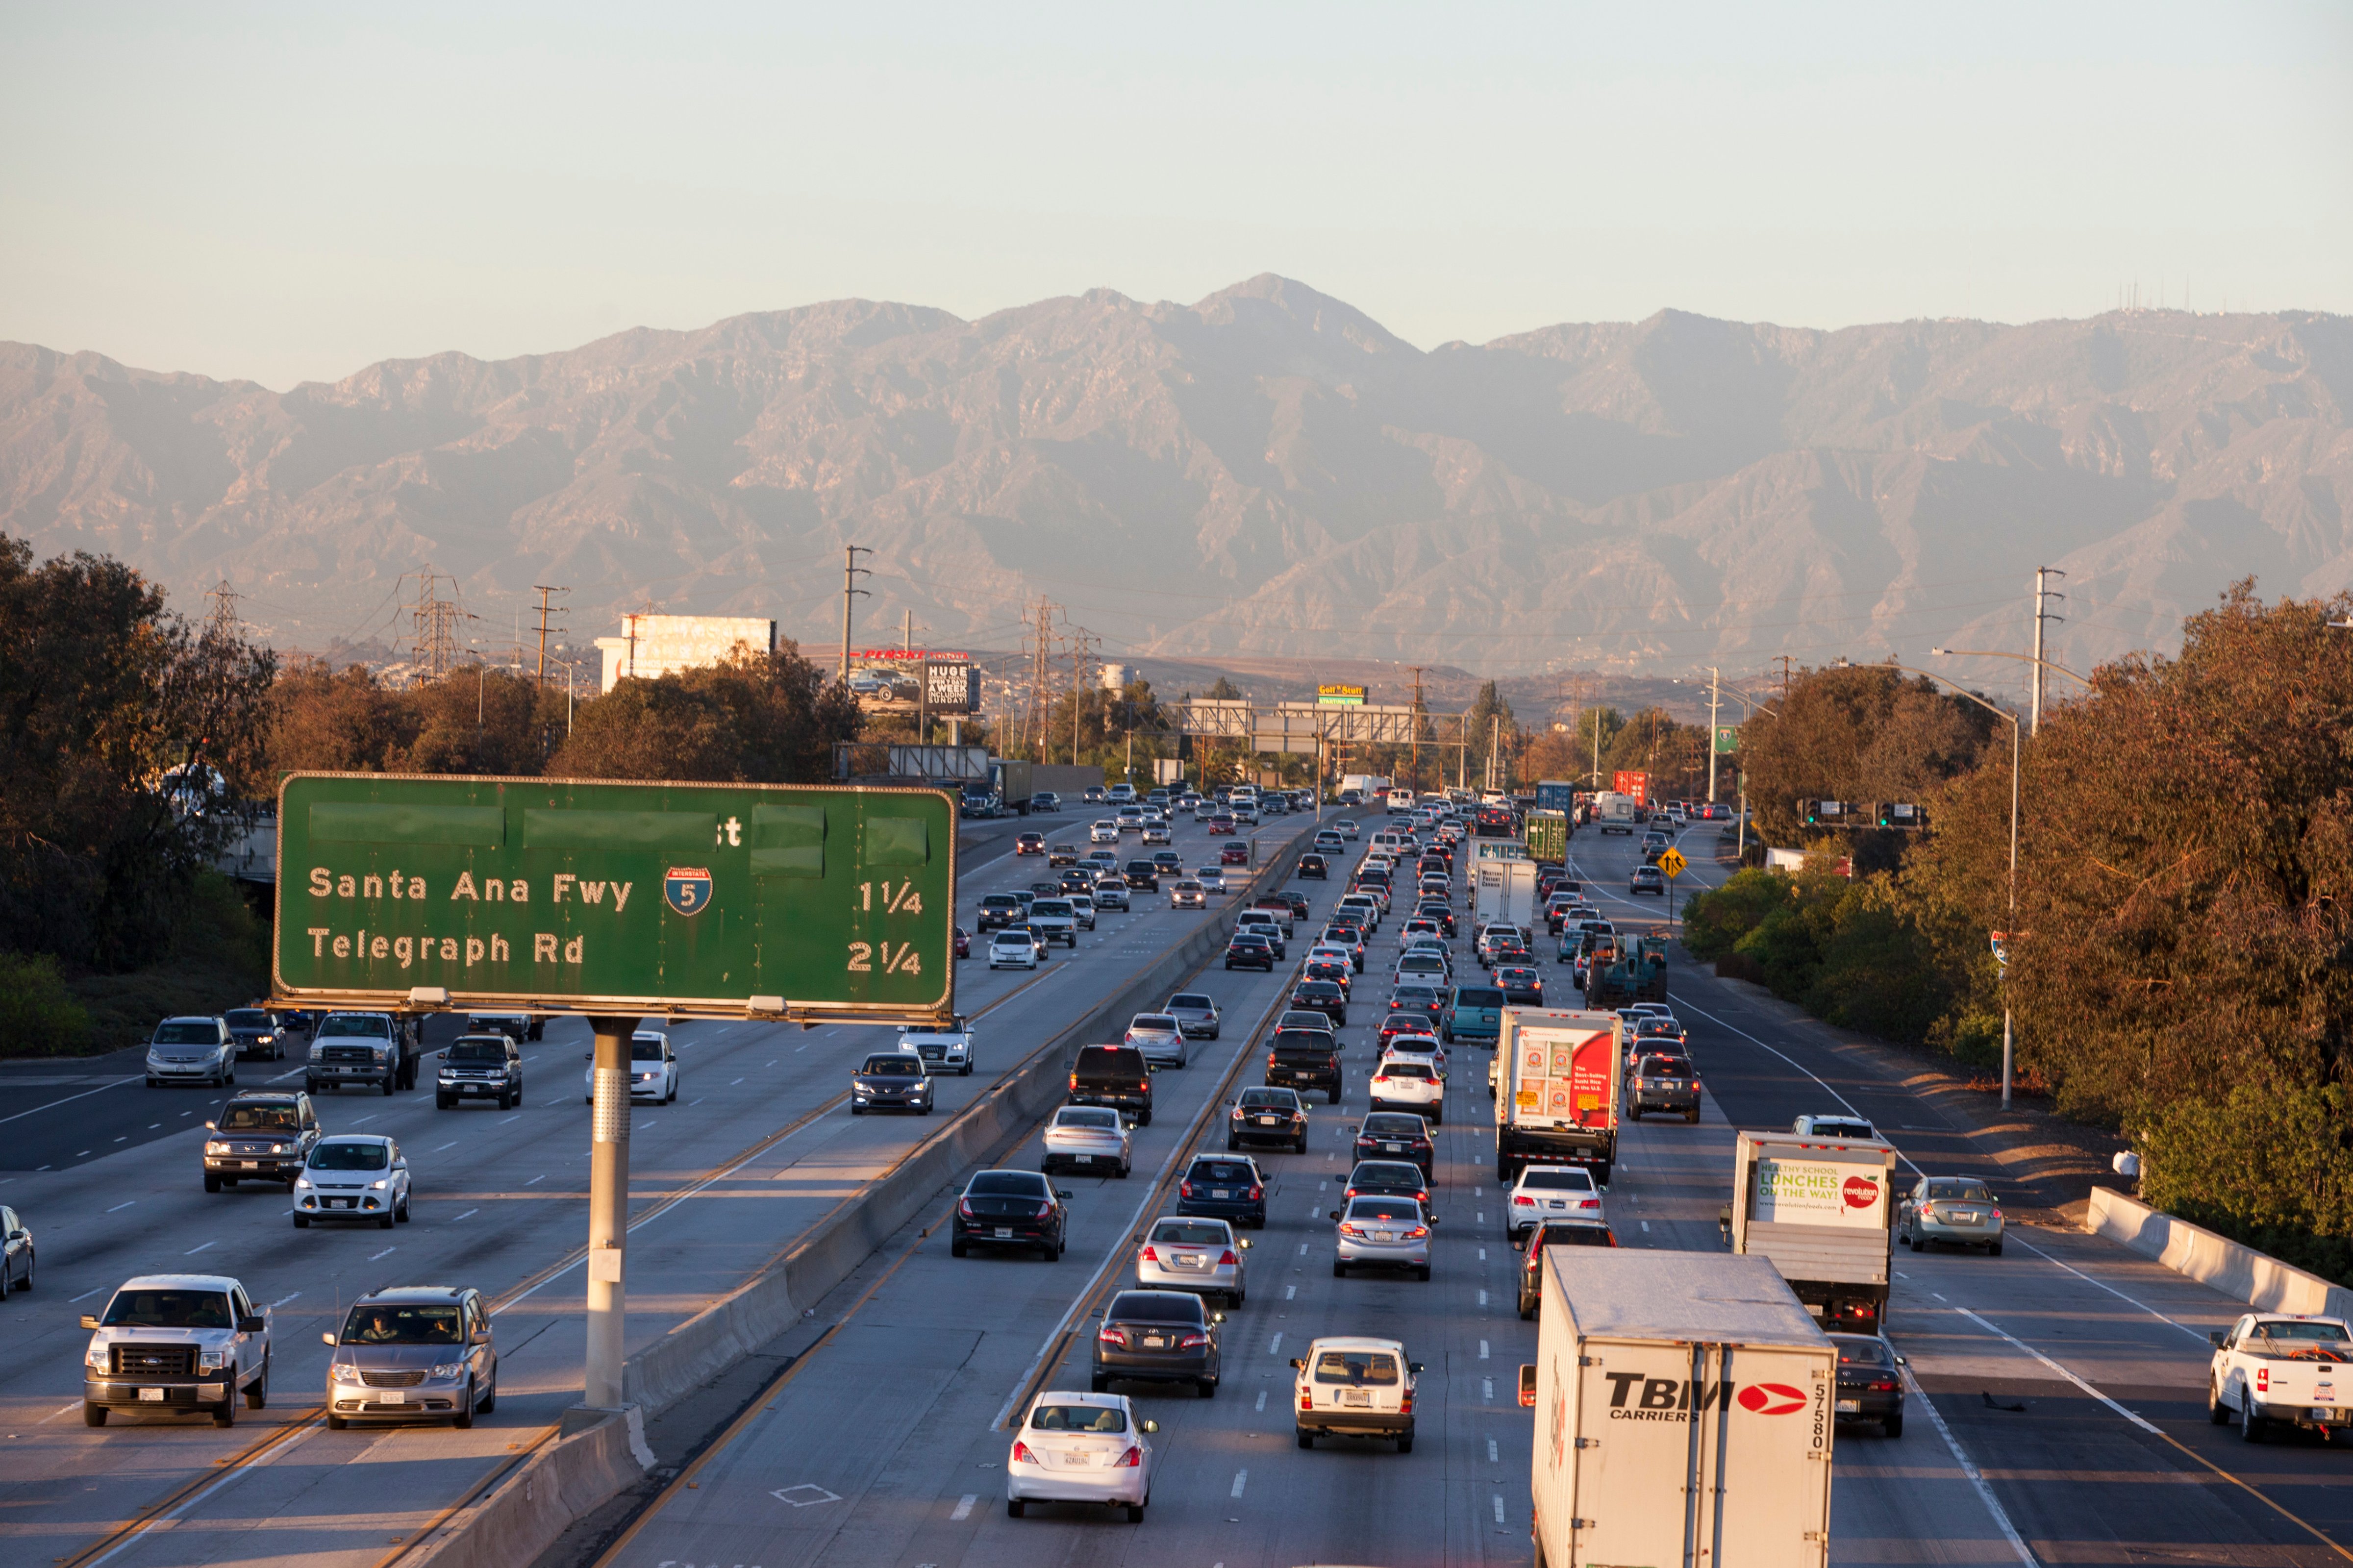 The 605 freeway is jammed with cars on a day when the mountains are visible in the distance, on November 5, 2014 in Los Angeles, California. (Melanie Stetson Freeman—AP)